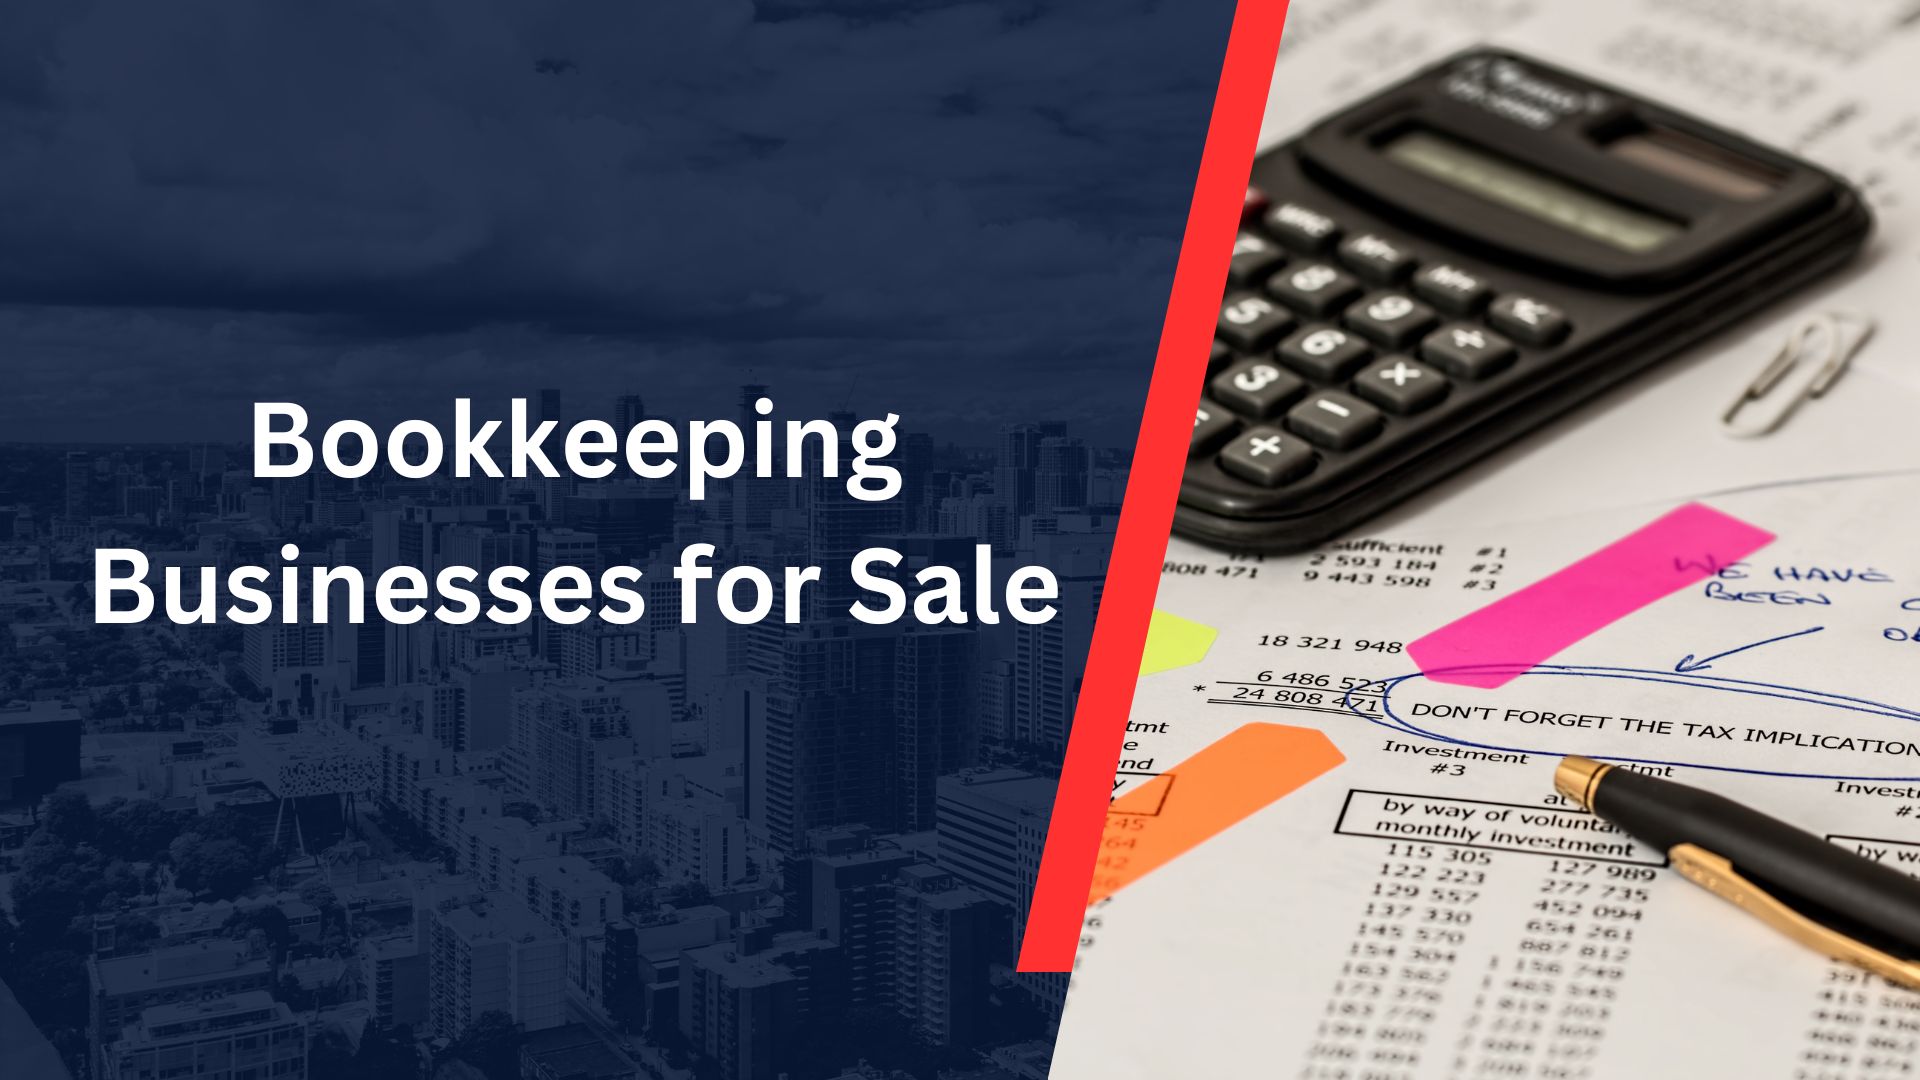 Bookkeeping Businesses for Sale